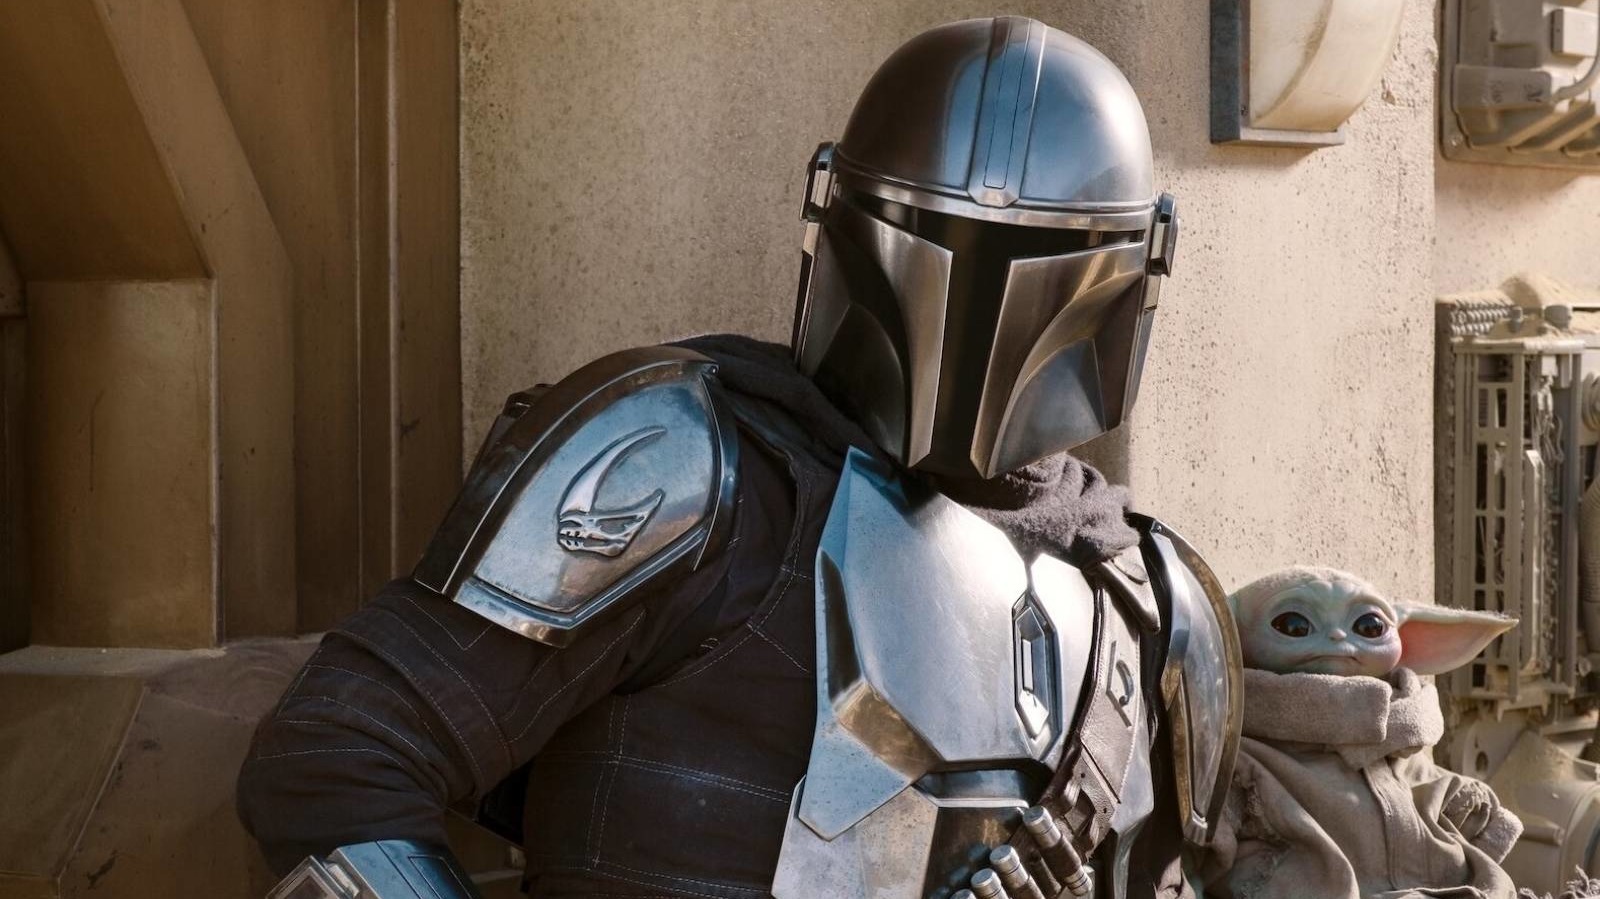 How The Mandalorian Fits Into the Star Wars Timeline